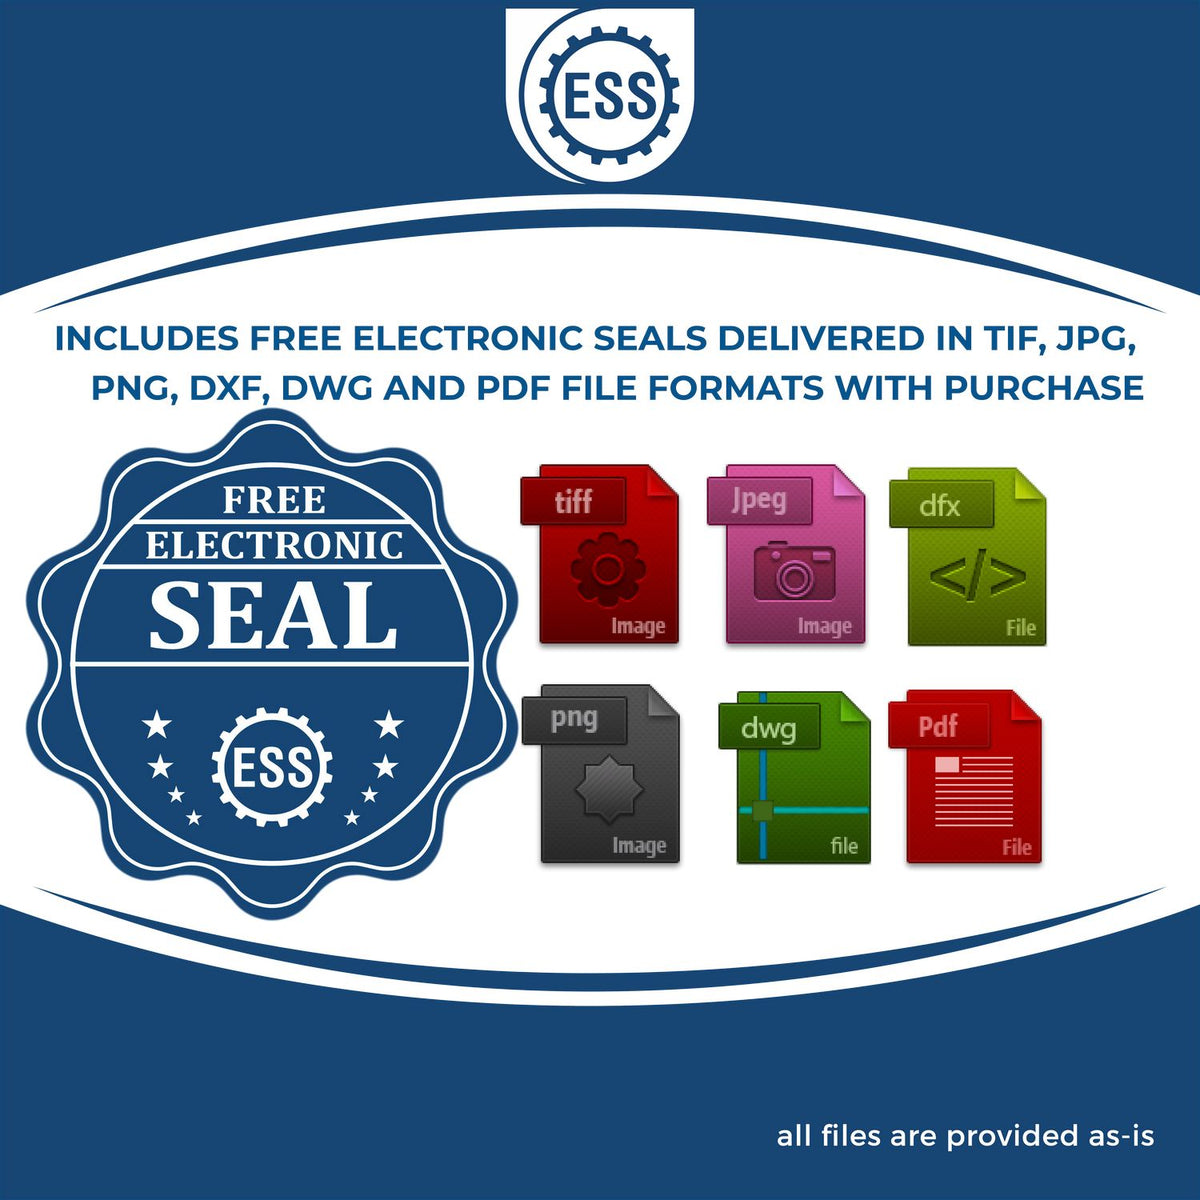 An infographic for the free electronic seal for the Gift Montana Geologist Seal illustrating the different file type icons such as DXF, DWG, TIF, JPG and PNG.